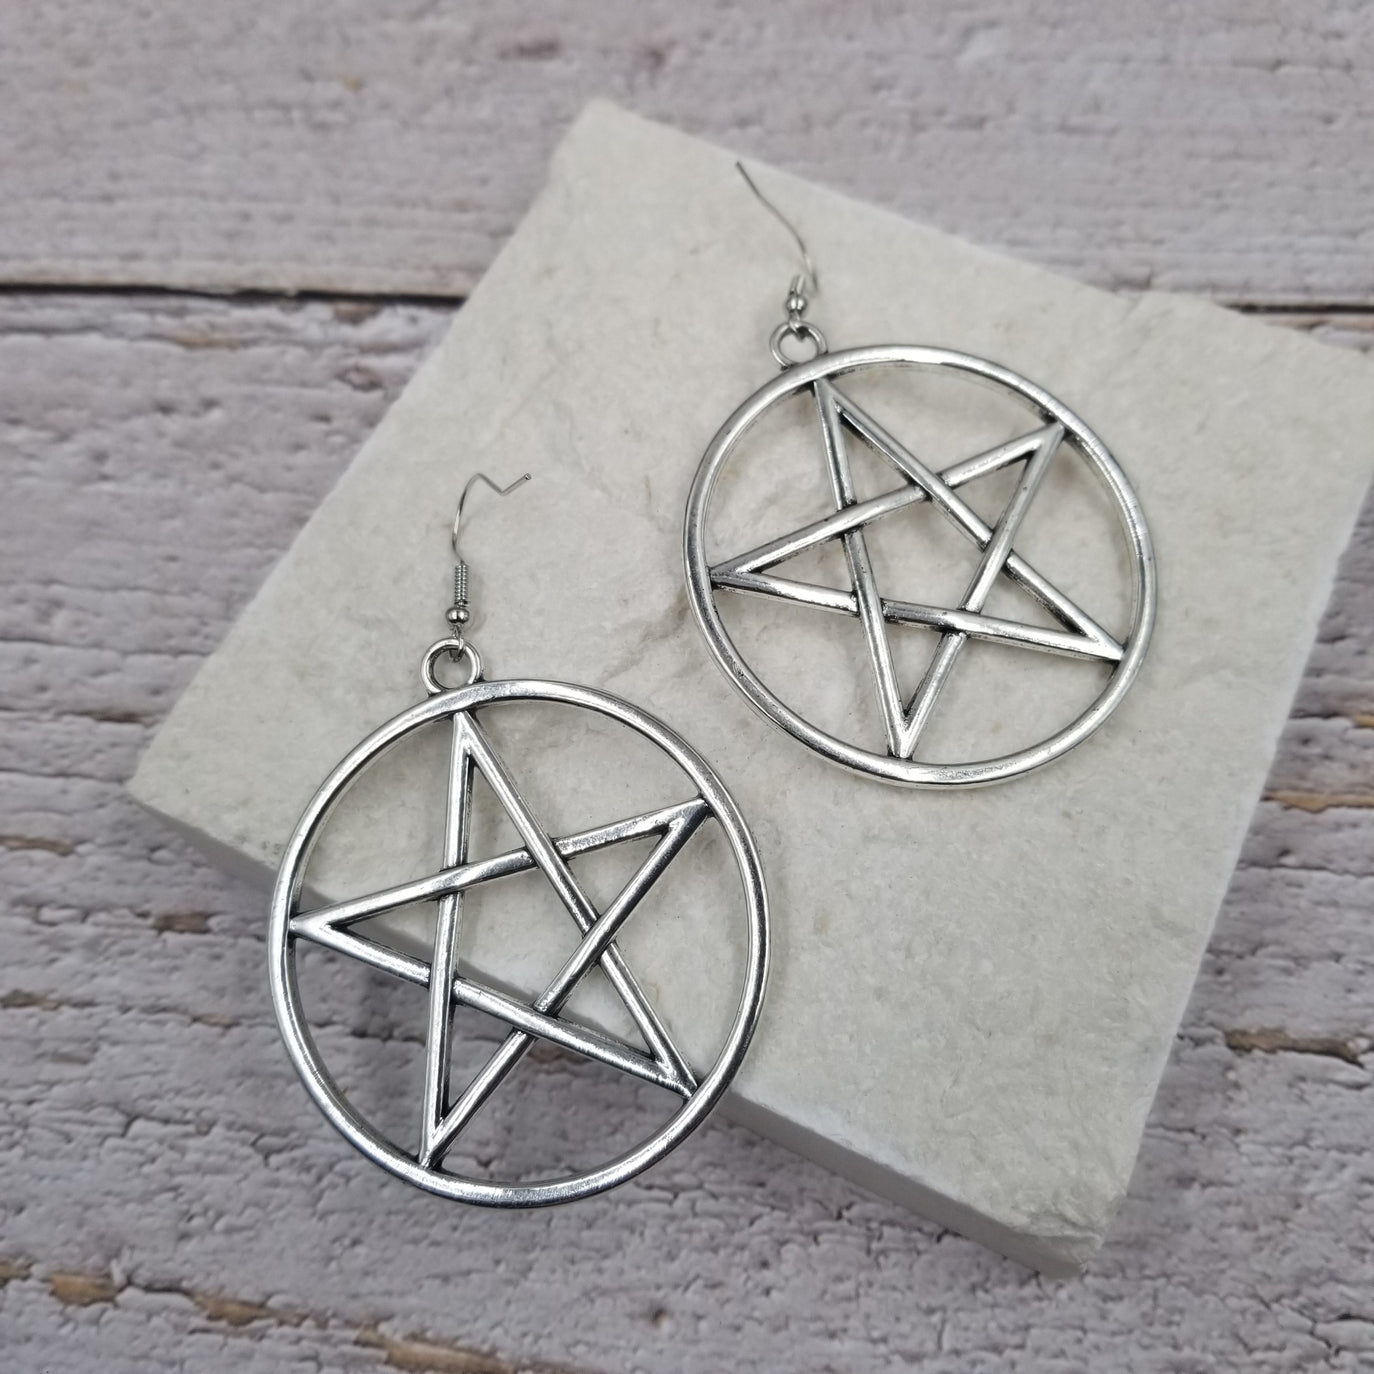 A pair of bold shiny silver metal 2" pentacle dangle earrings with matching metal fishhook style ear wires